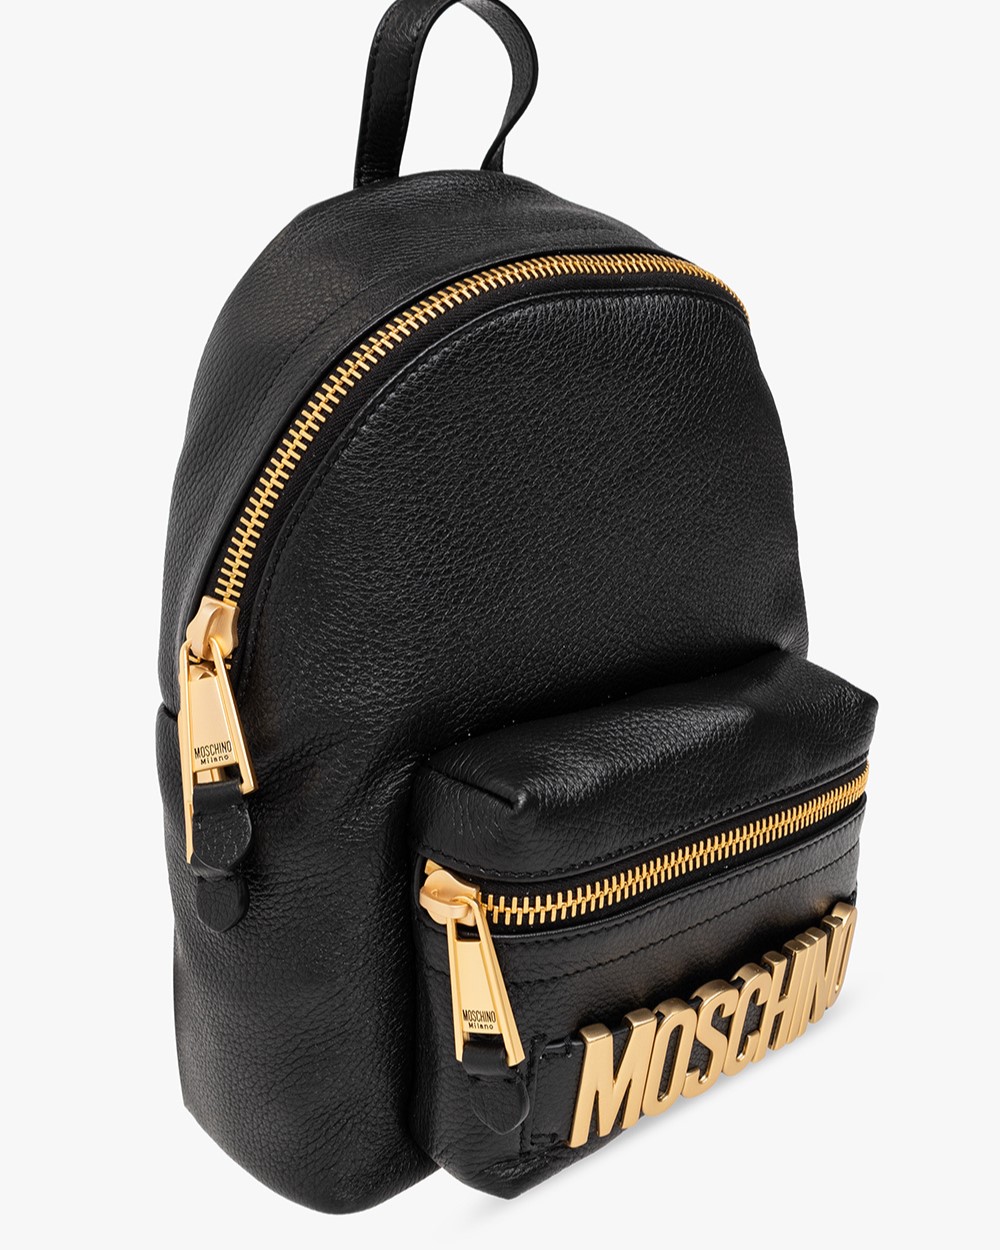 BALO NỮ MOSCHINO BLACK LEATHER BACKPACK WITH LOGO 4